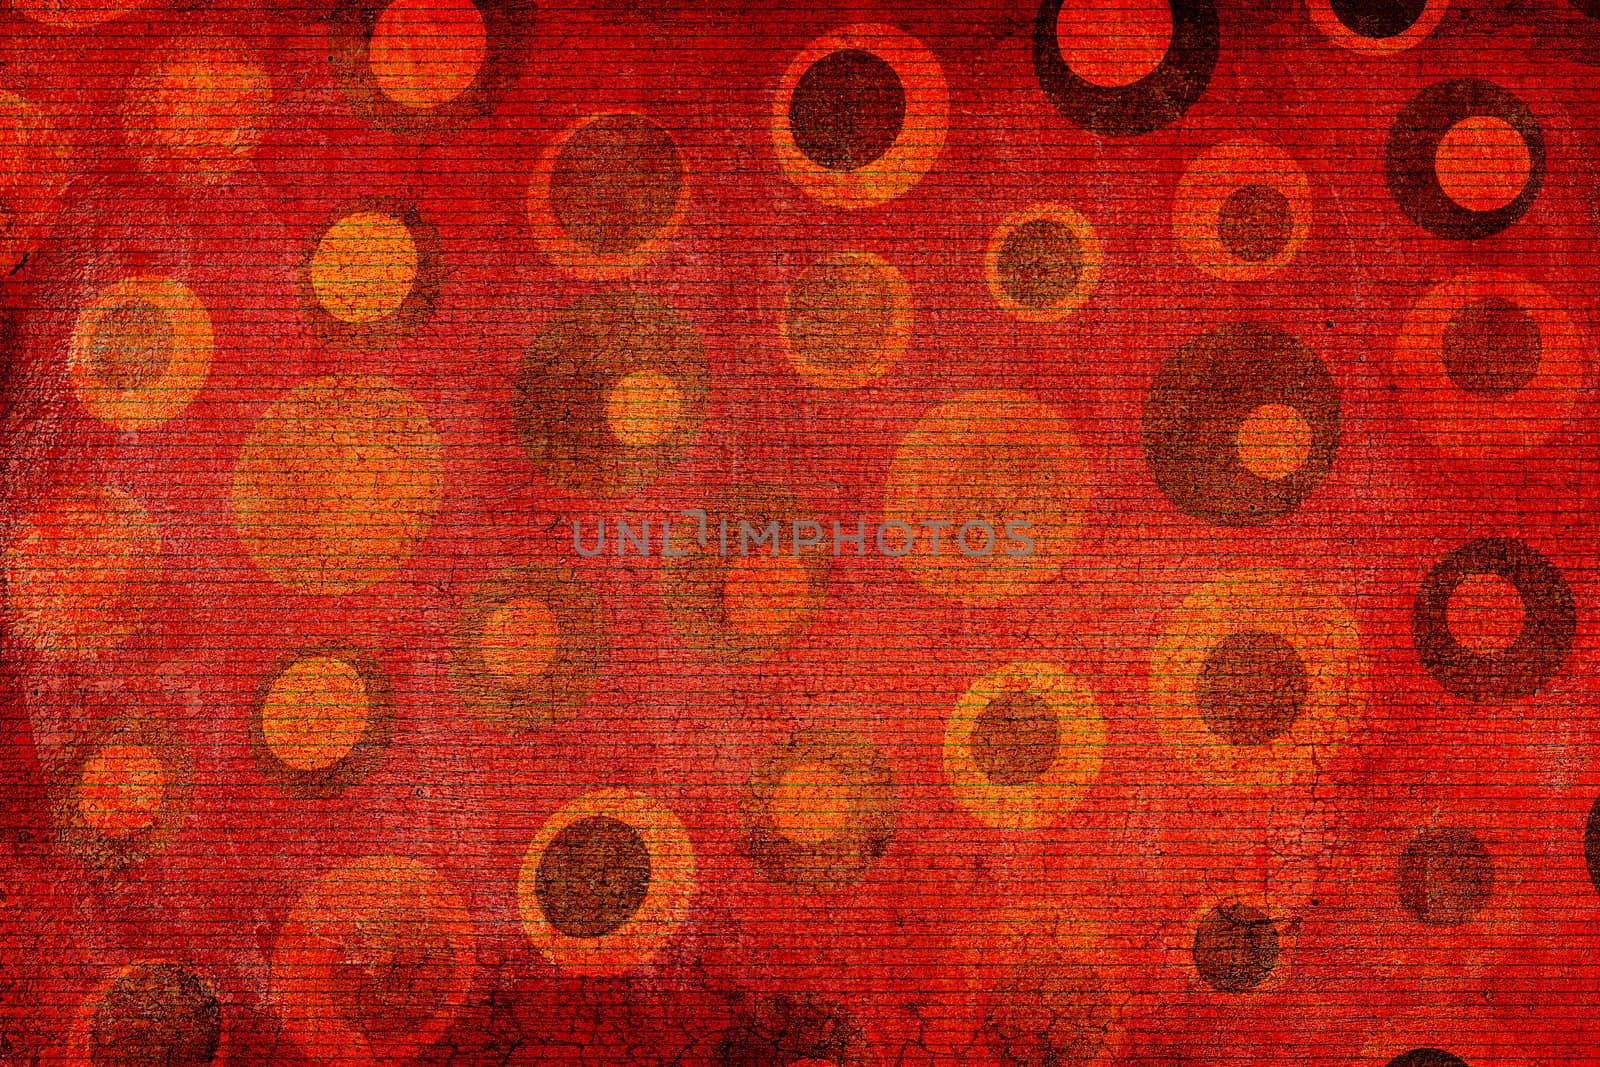 Dark texture background made of  red, orange and brown dots, or circles, with horizontal lines